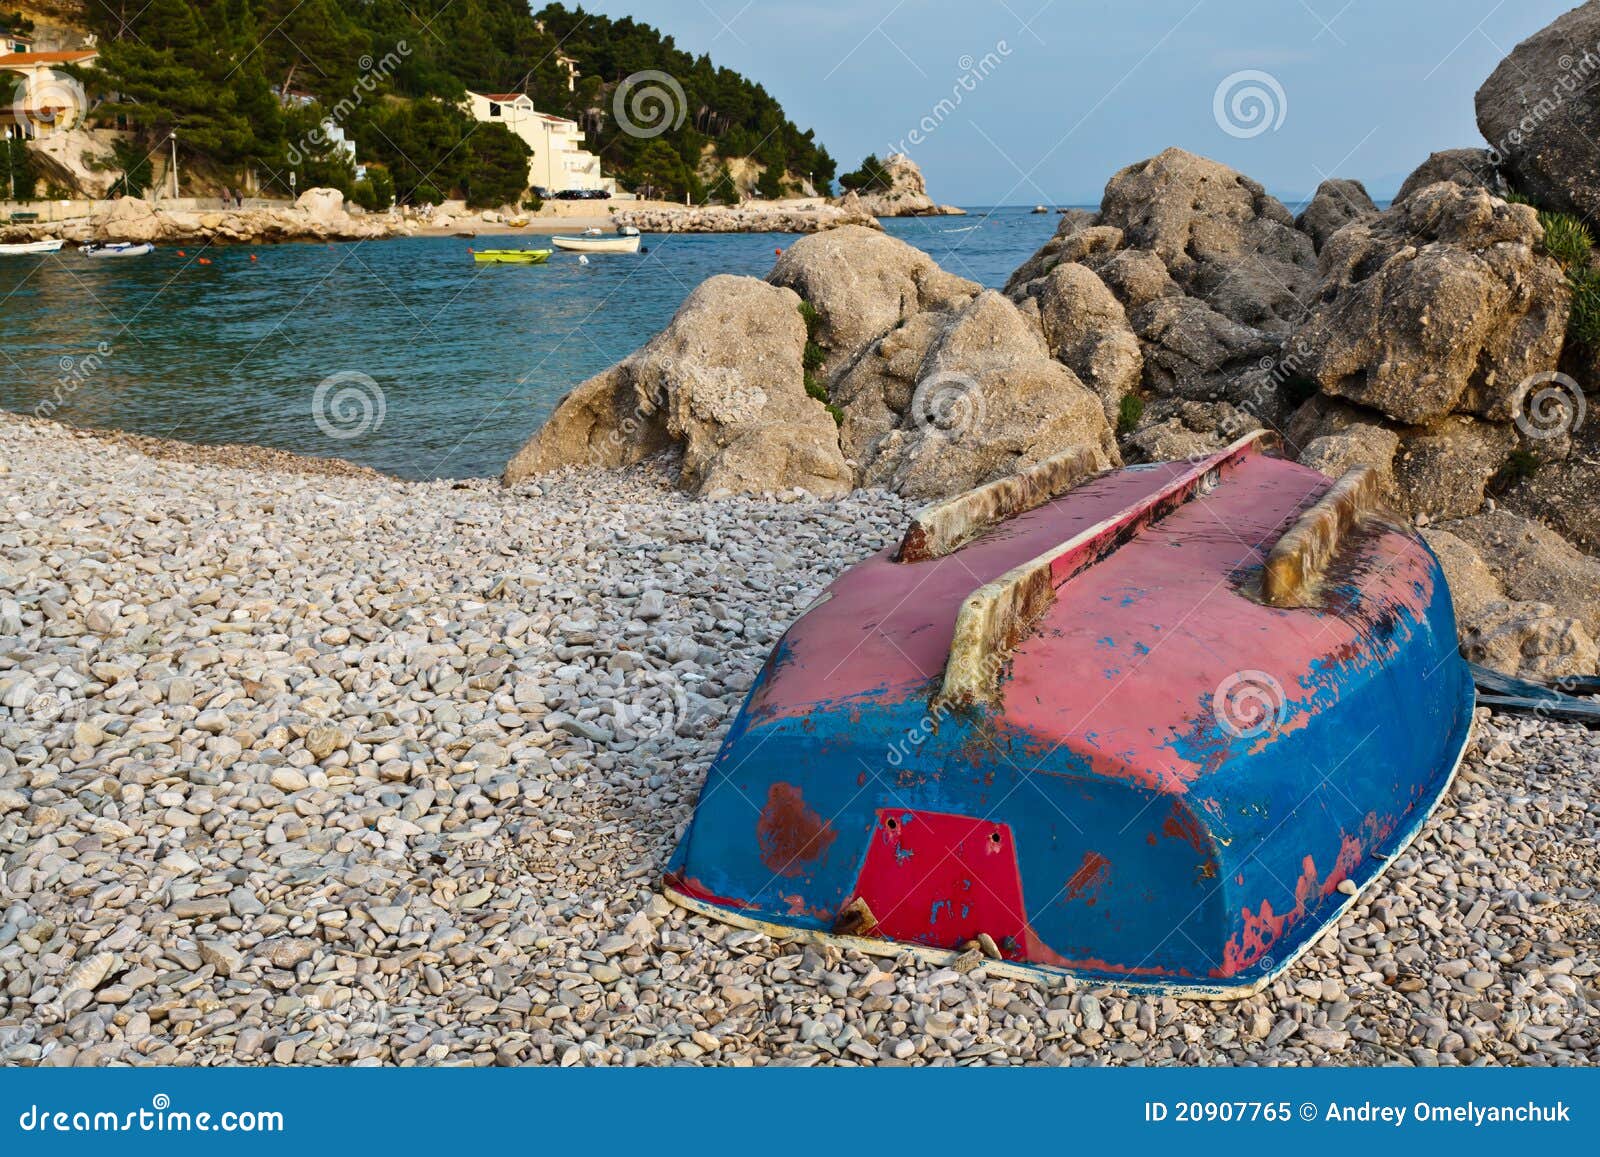 SMALL WOODEN FISHING BOATS LYING UPSIDE DOWN ON SHORE. CHINESE